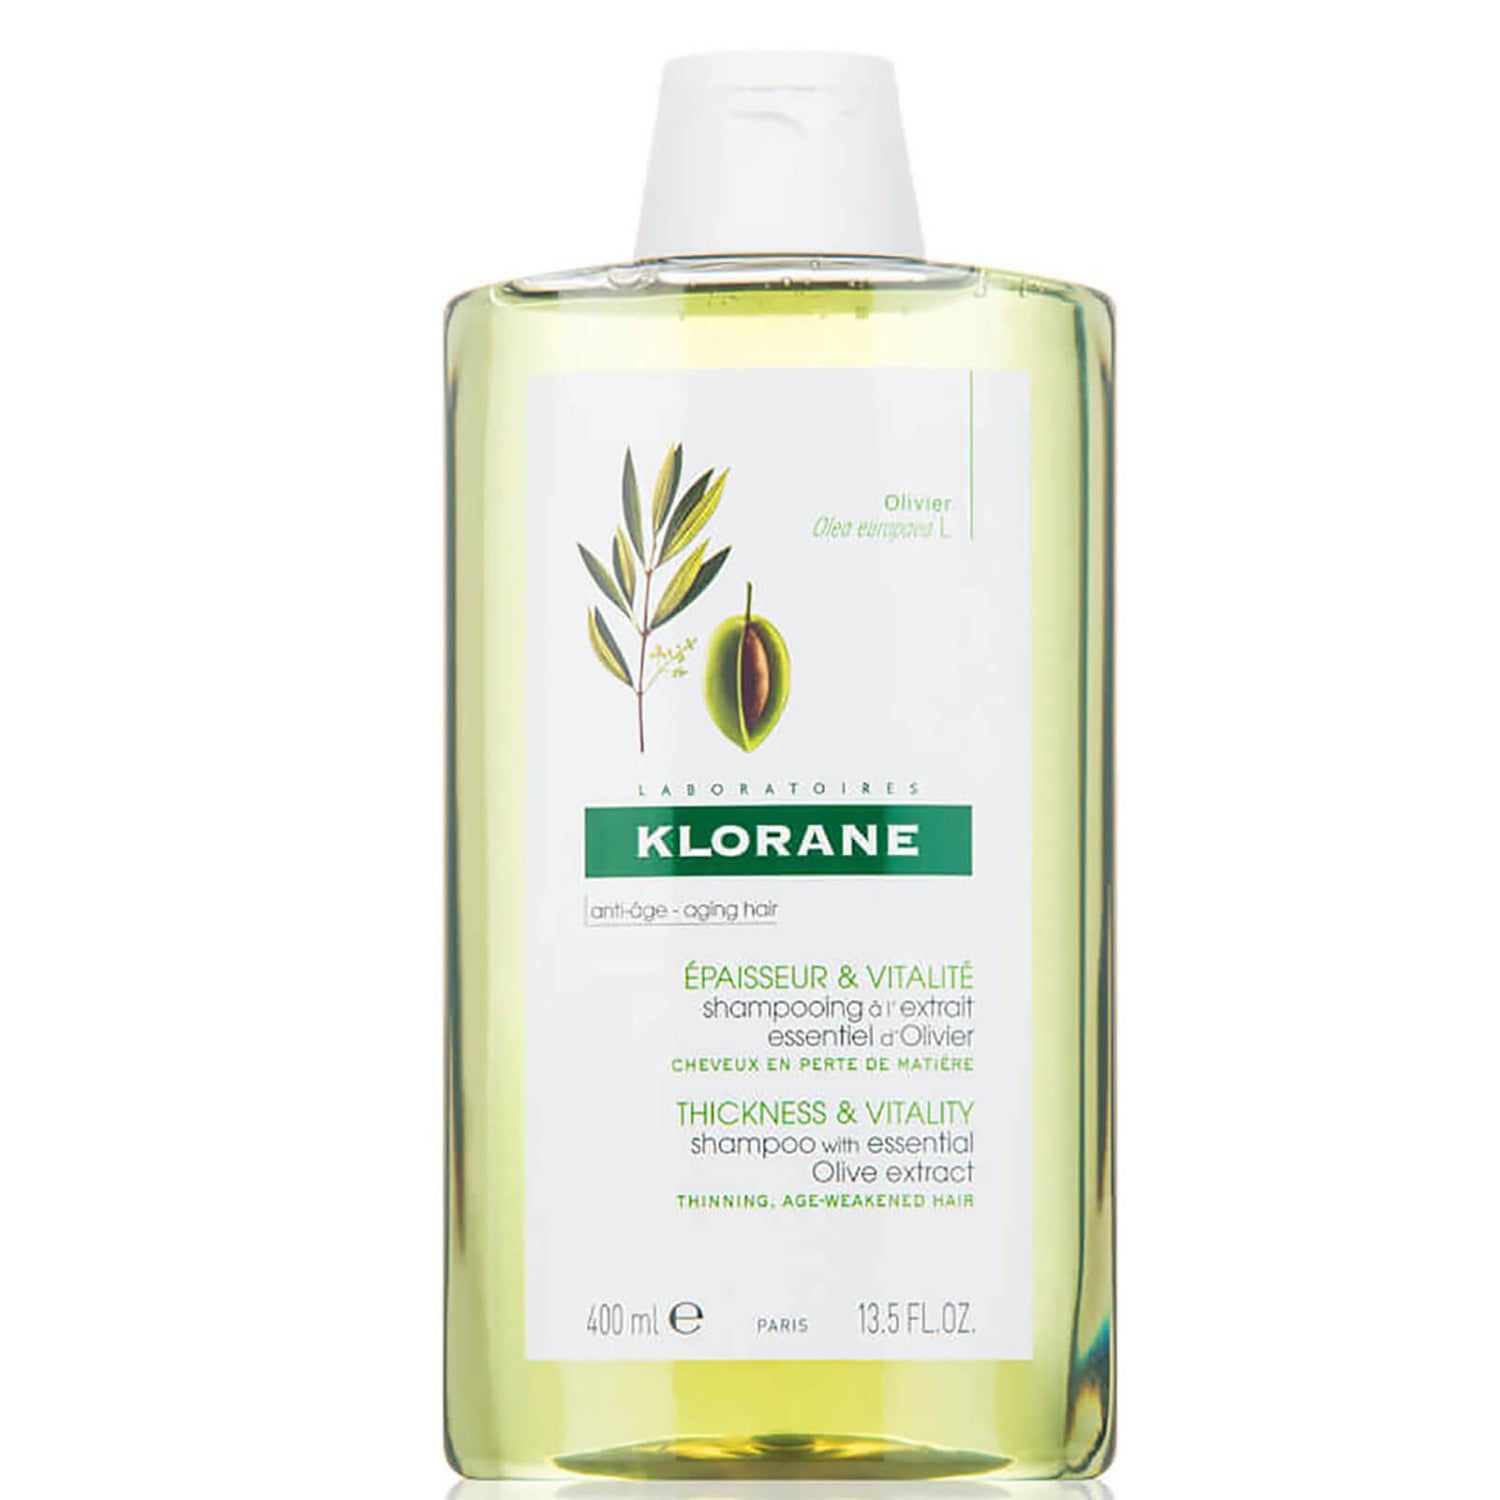 KLORANE Shampoo with Essential Olive Extract - 13.5 fl. oz.